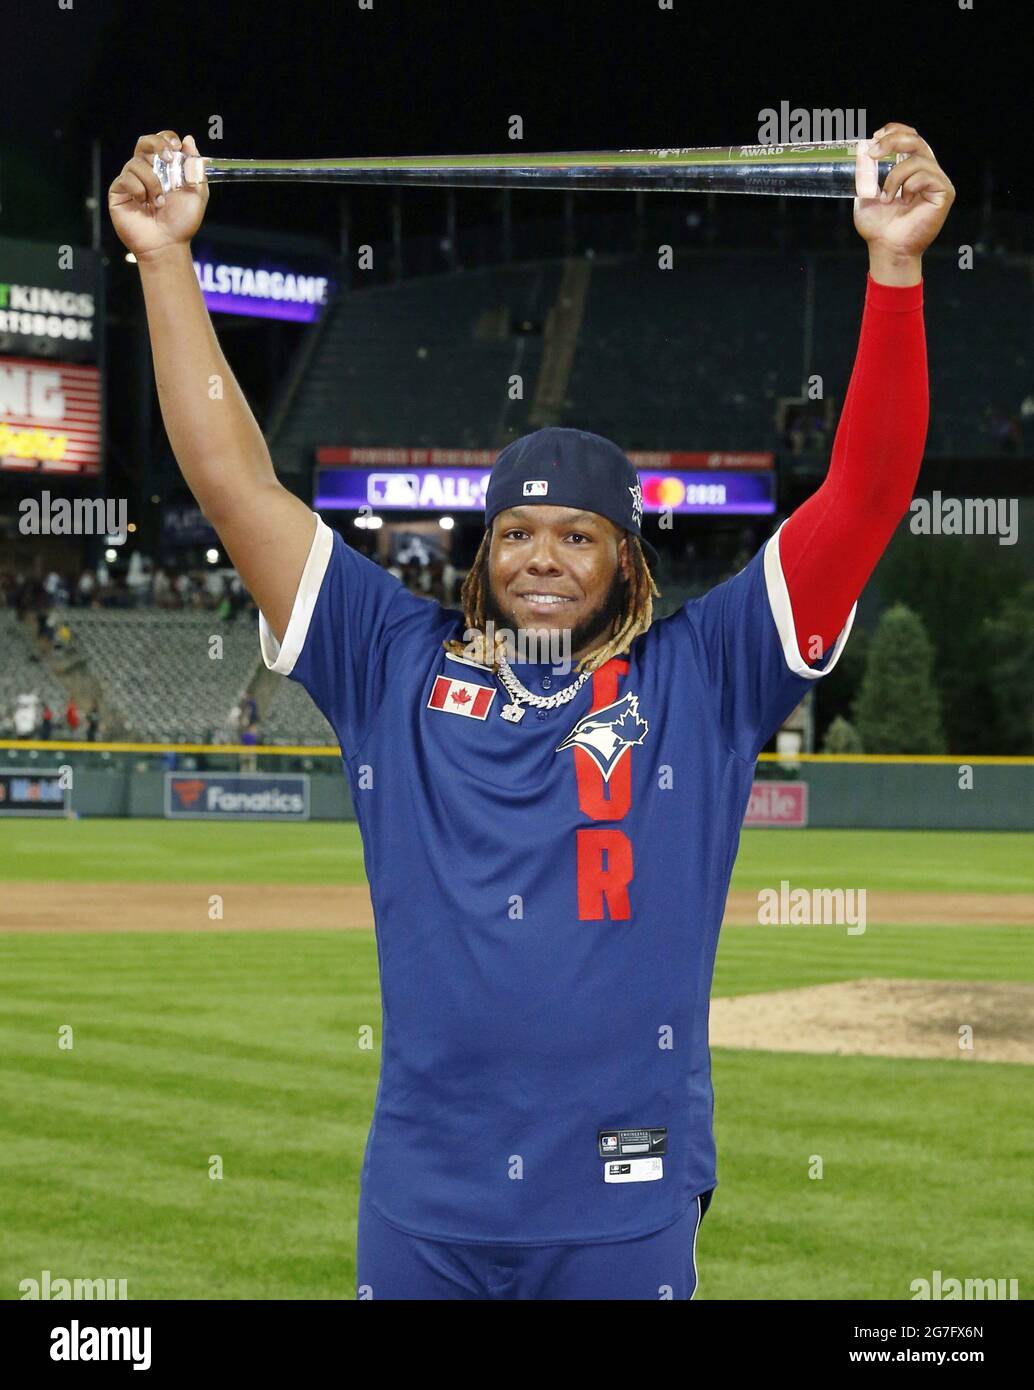 Denver, United States. 13th July, 2021. Toronto Blue Jays first baseman  Vladimir Guerrero Jr. holds the trophy after being named the MVP of the  2021 MLB All-Star Game at Coors Field in